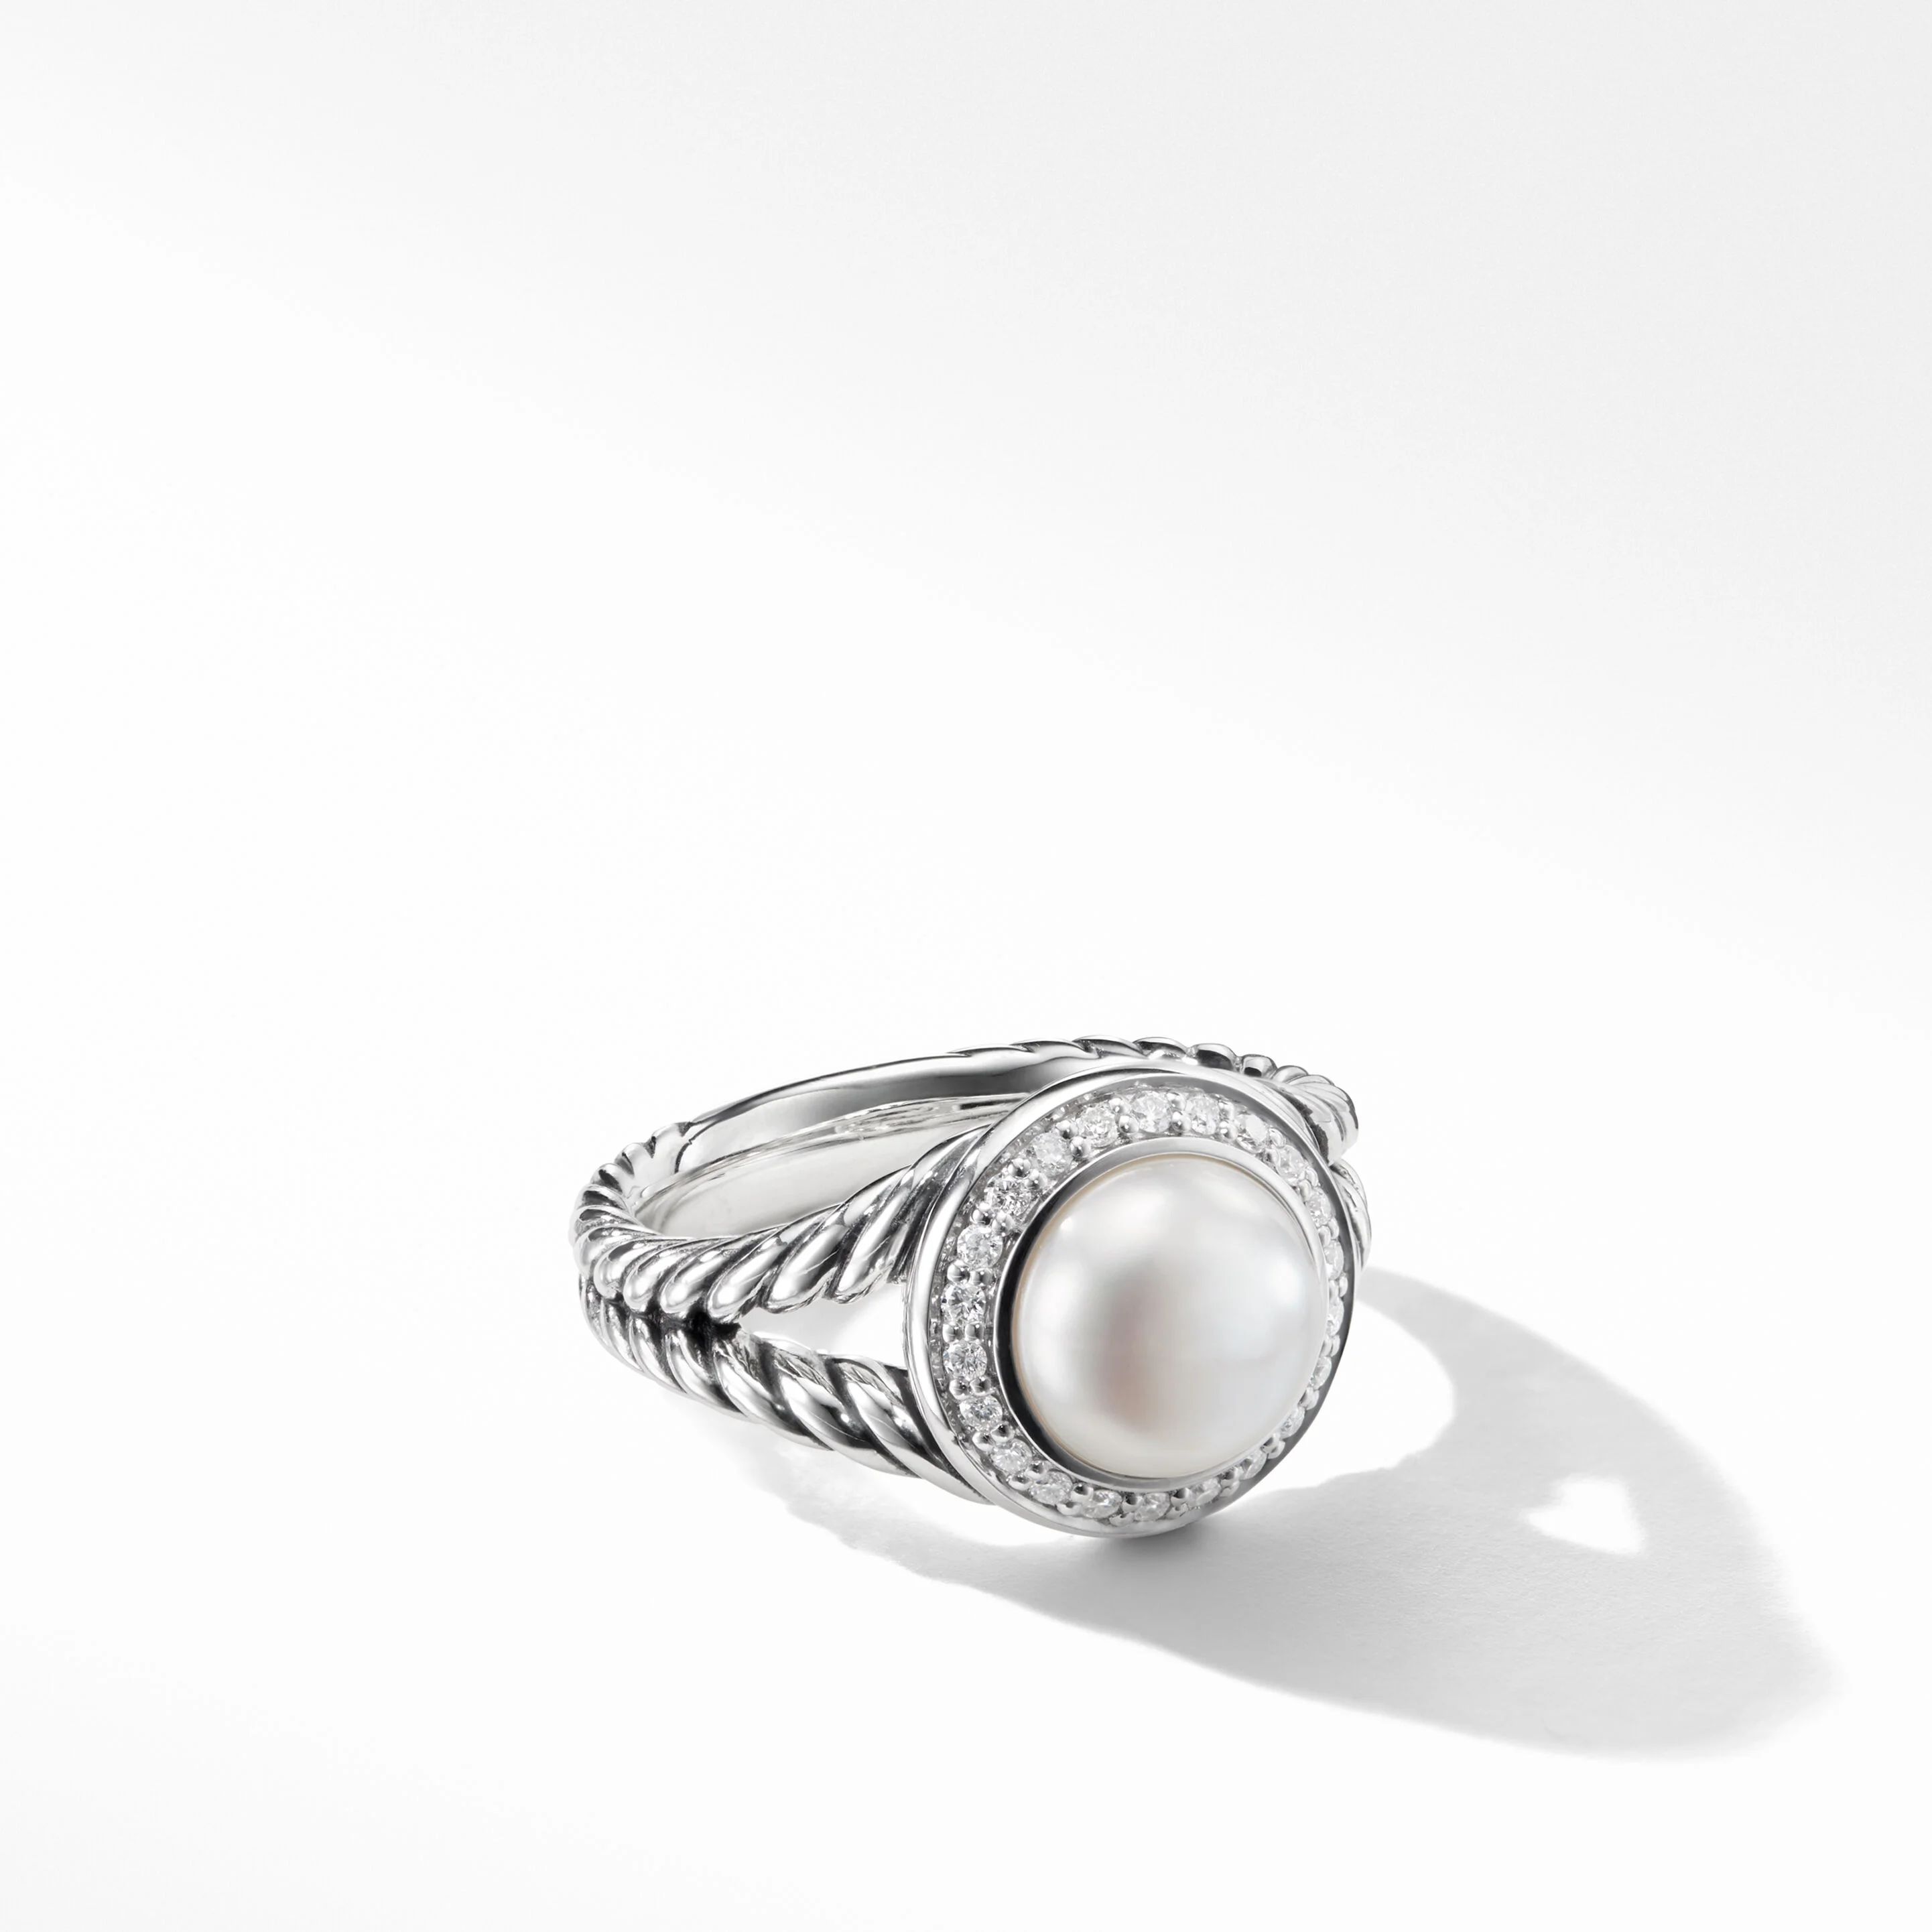 Albion® Pearl Ring in Sterling Silver with Pavé Diamonds | David Yurman